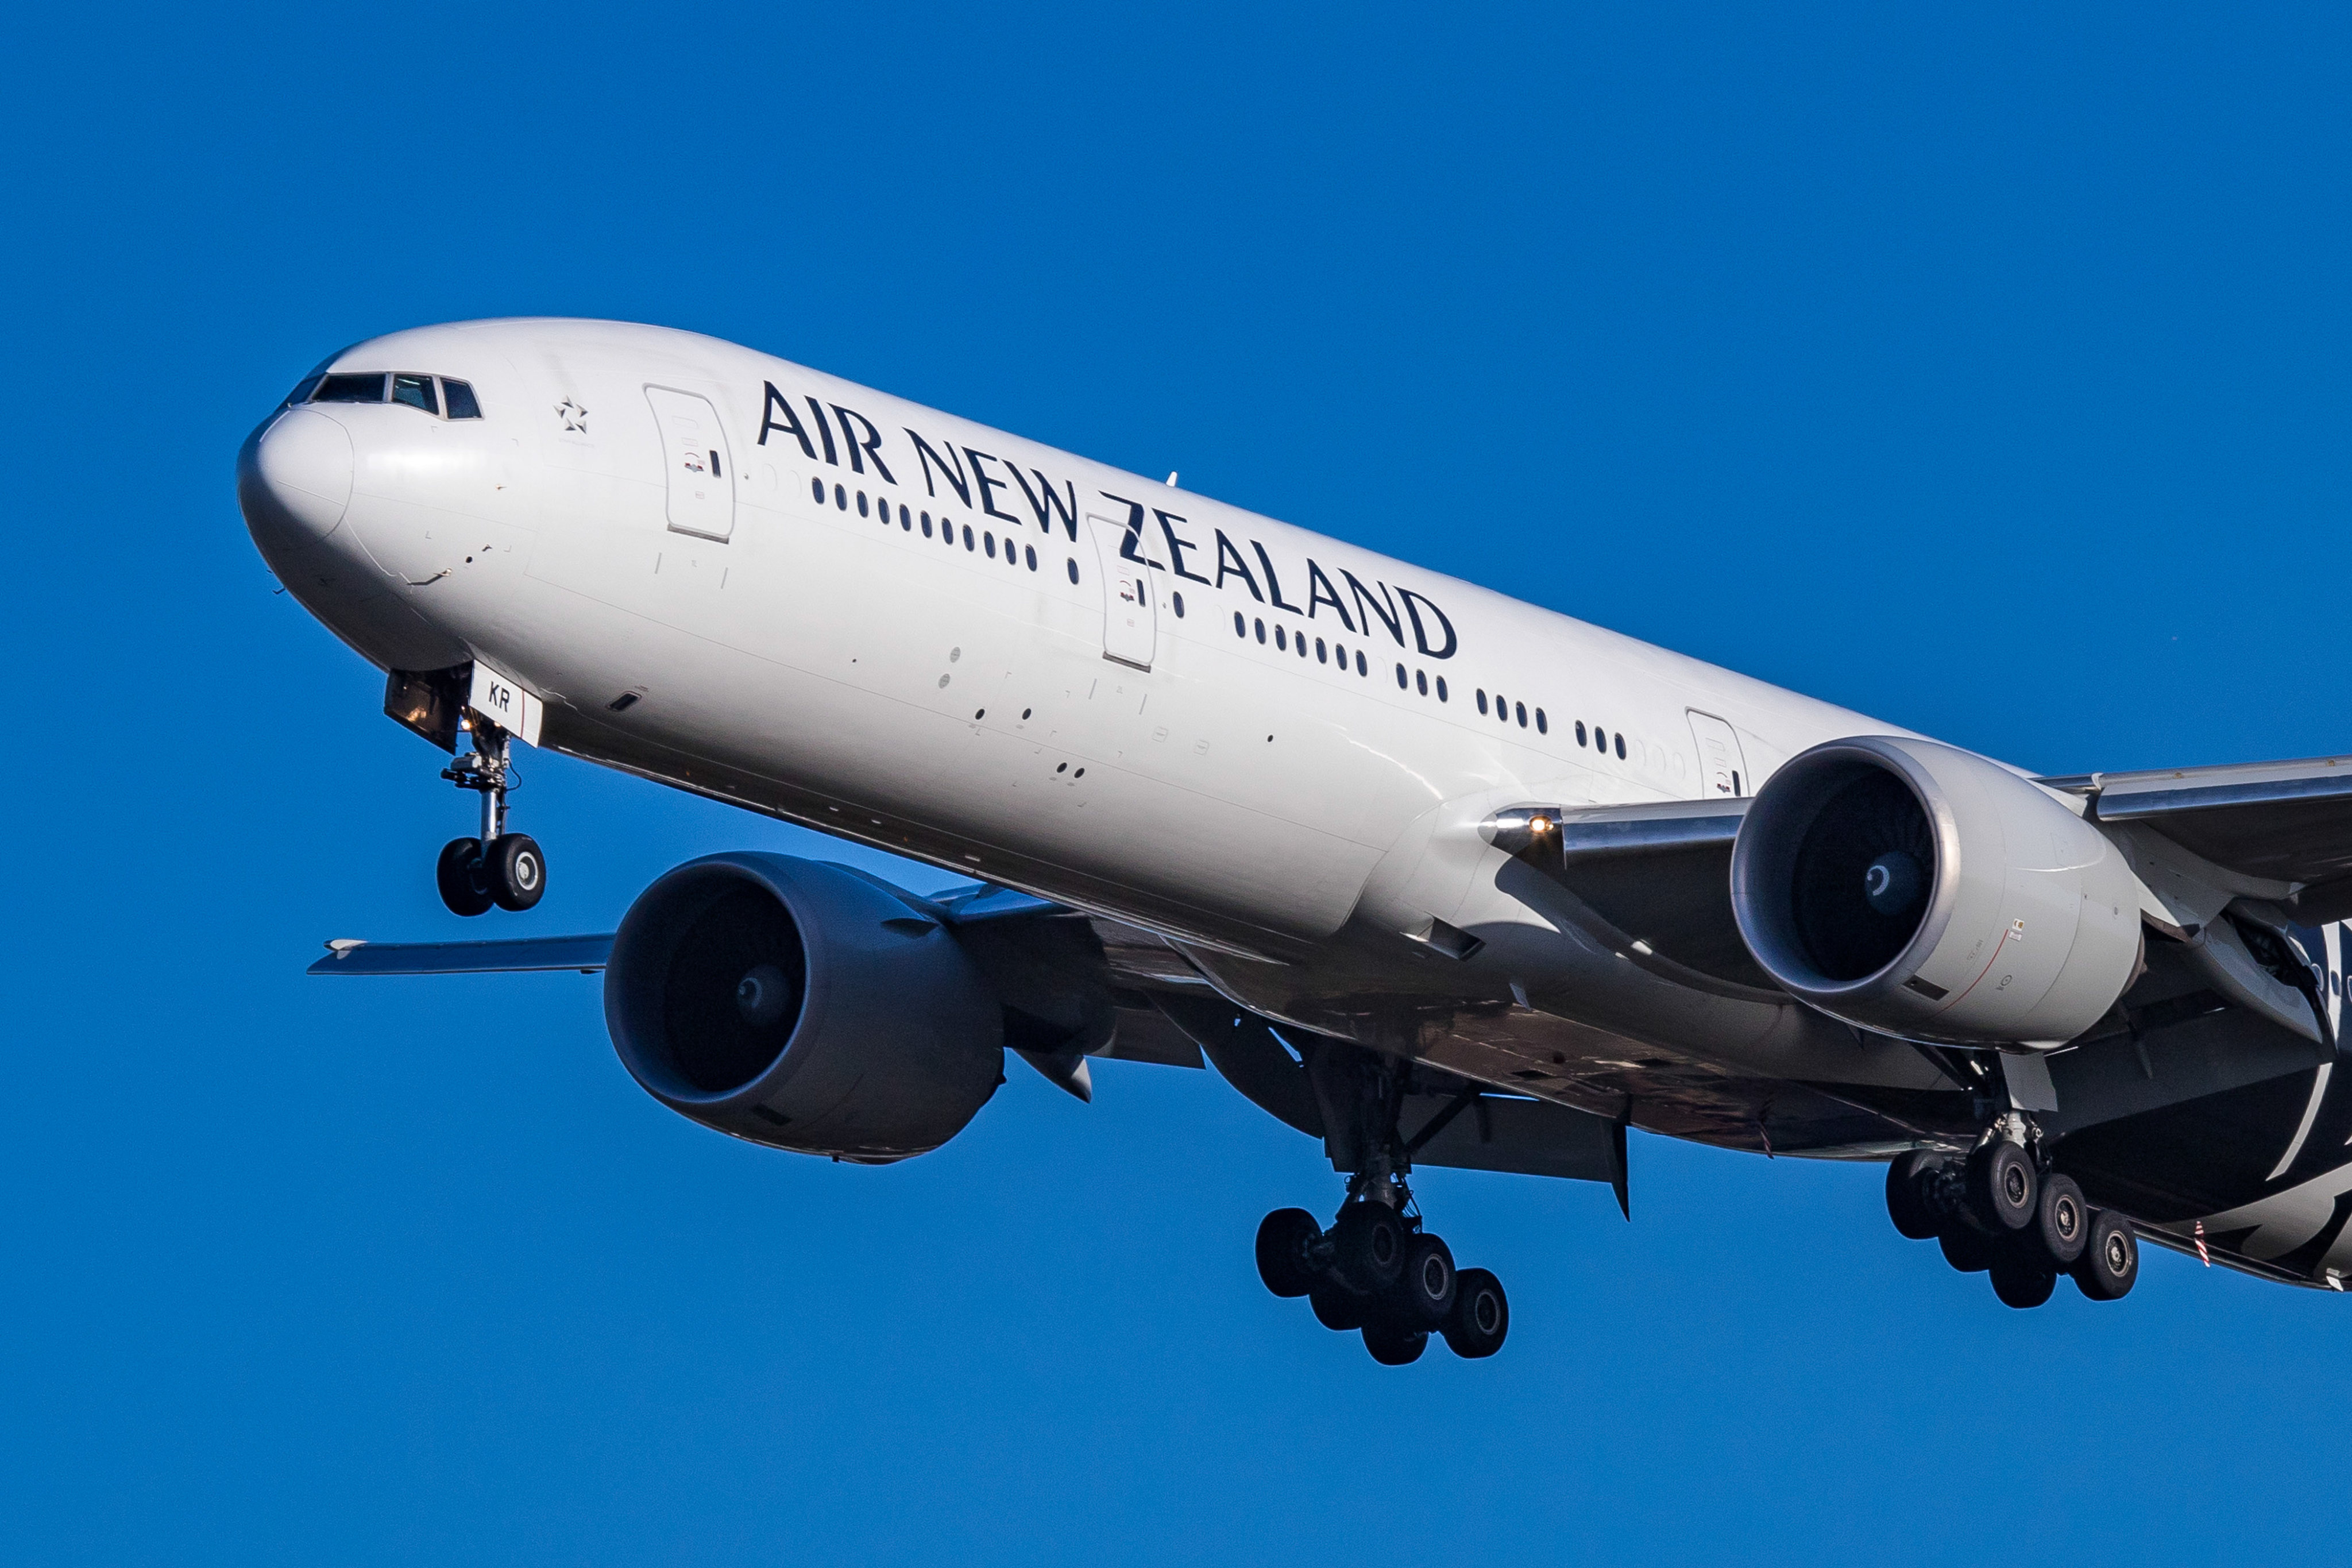 Air New Zealand said its compassionate care policy was not followed after the company charged a couple US$8,000 to change their flight. Photo: Getty Images